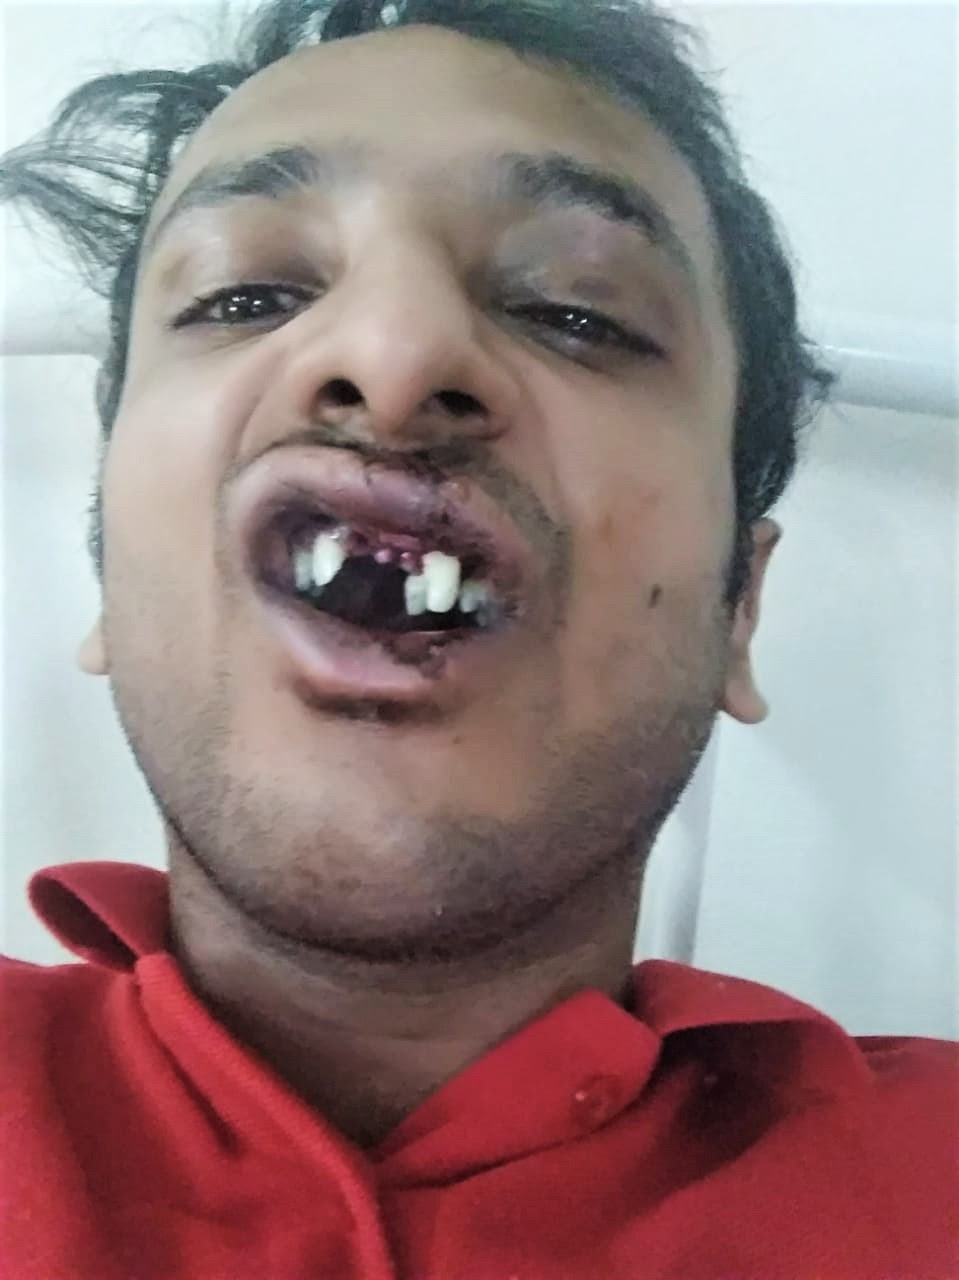  Abhishek Mangala lost teeth in assault by Hindu extremists in Sohna, Haryana state, India on Sept. 22, 2019. (Morning Star News)